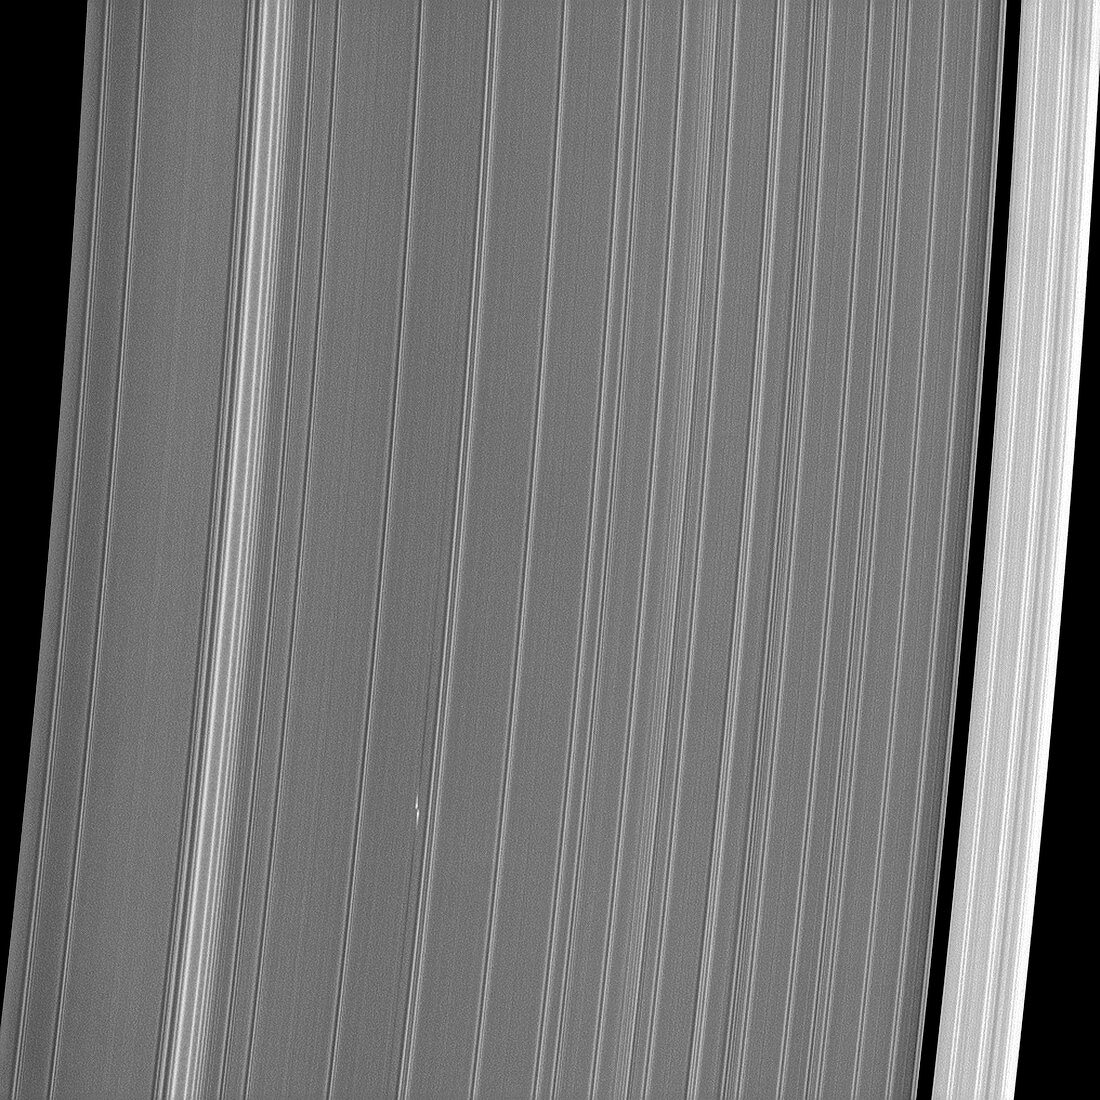 Saturn's rings and moonlet,Cassini image